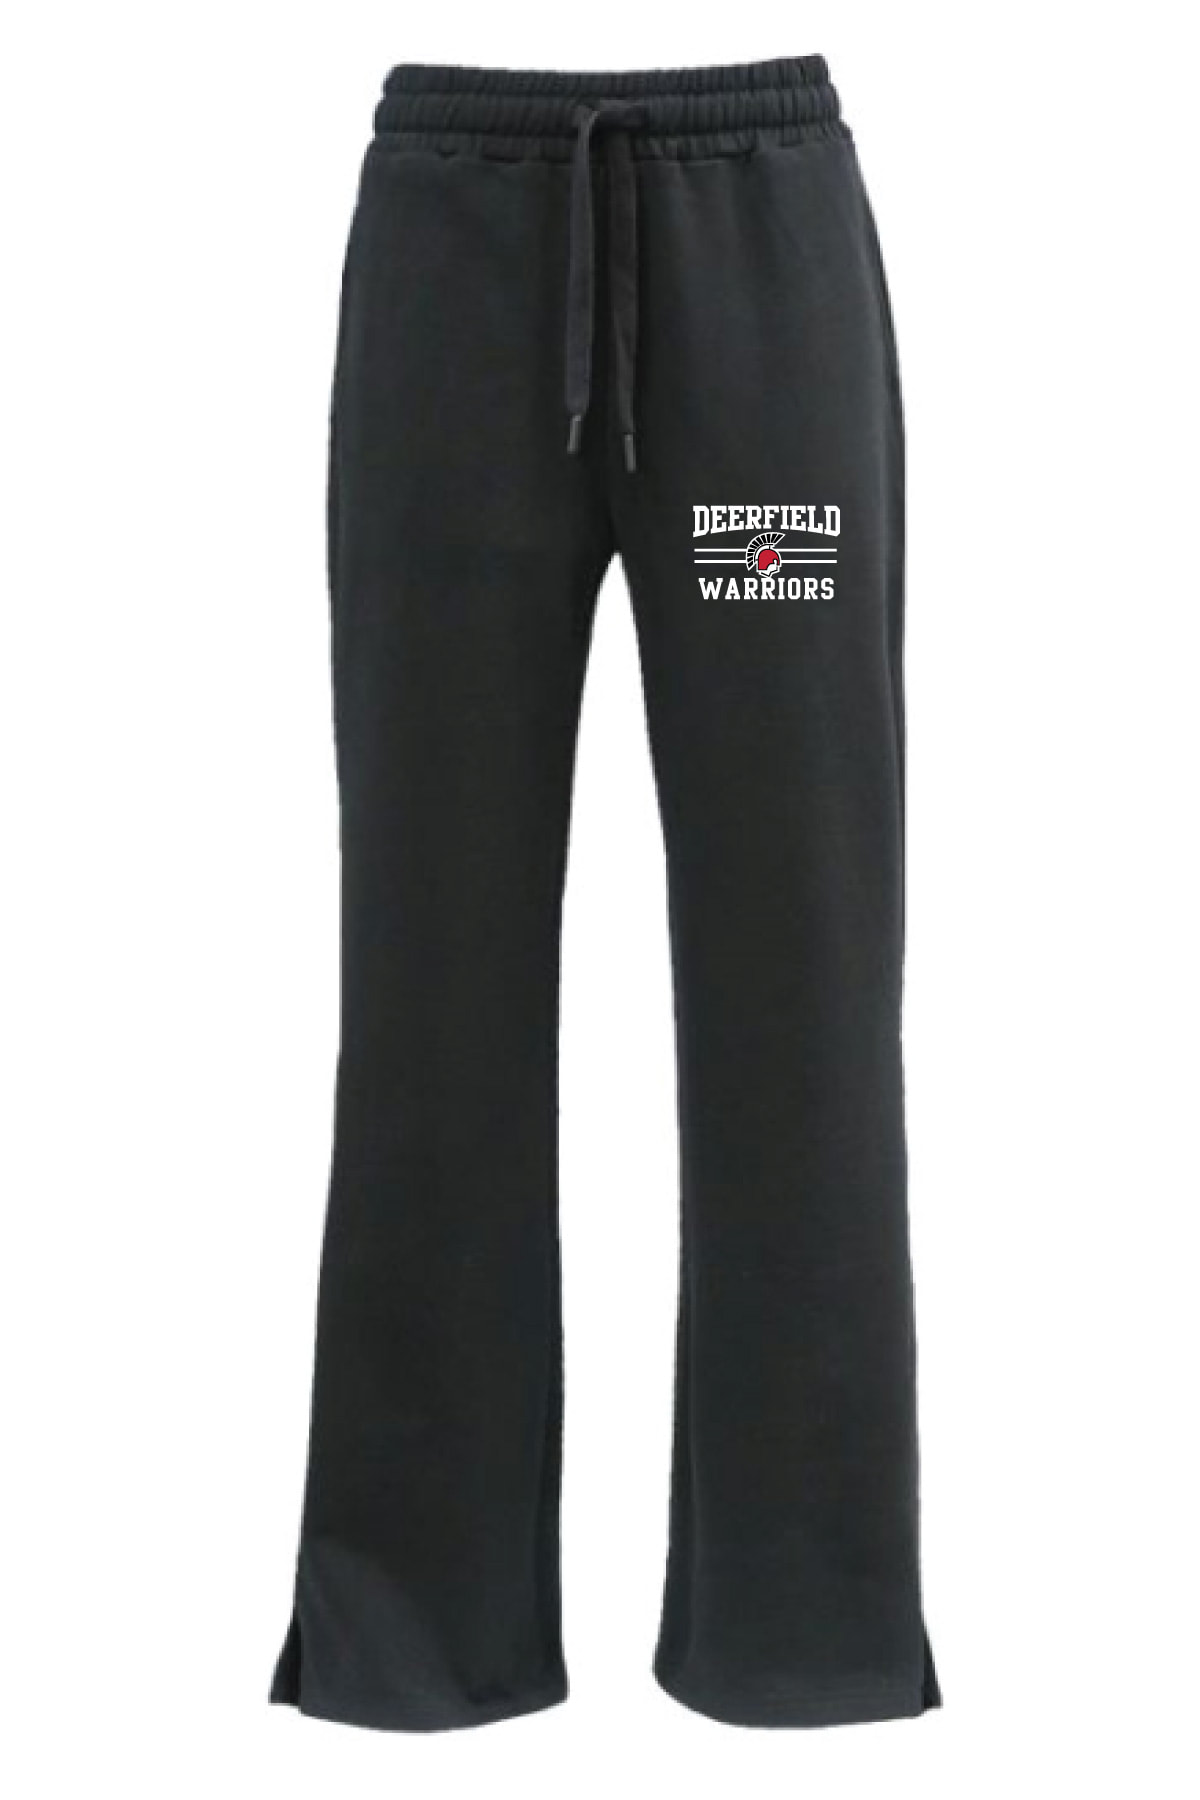 NEW STYLE! Women's Black Flare Bottom Sweatpants w/ embroidered logo